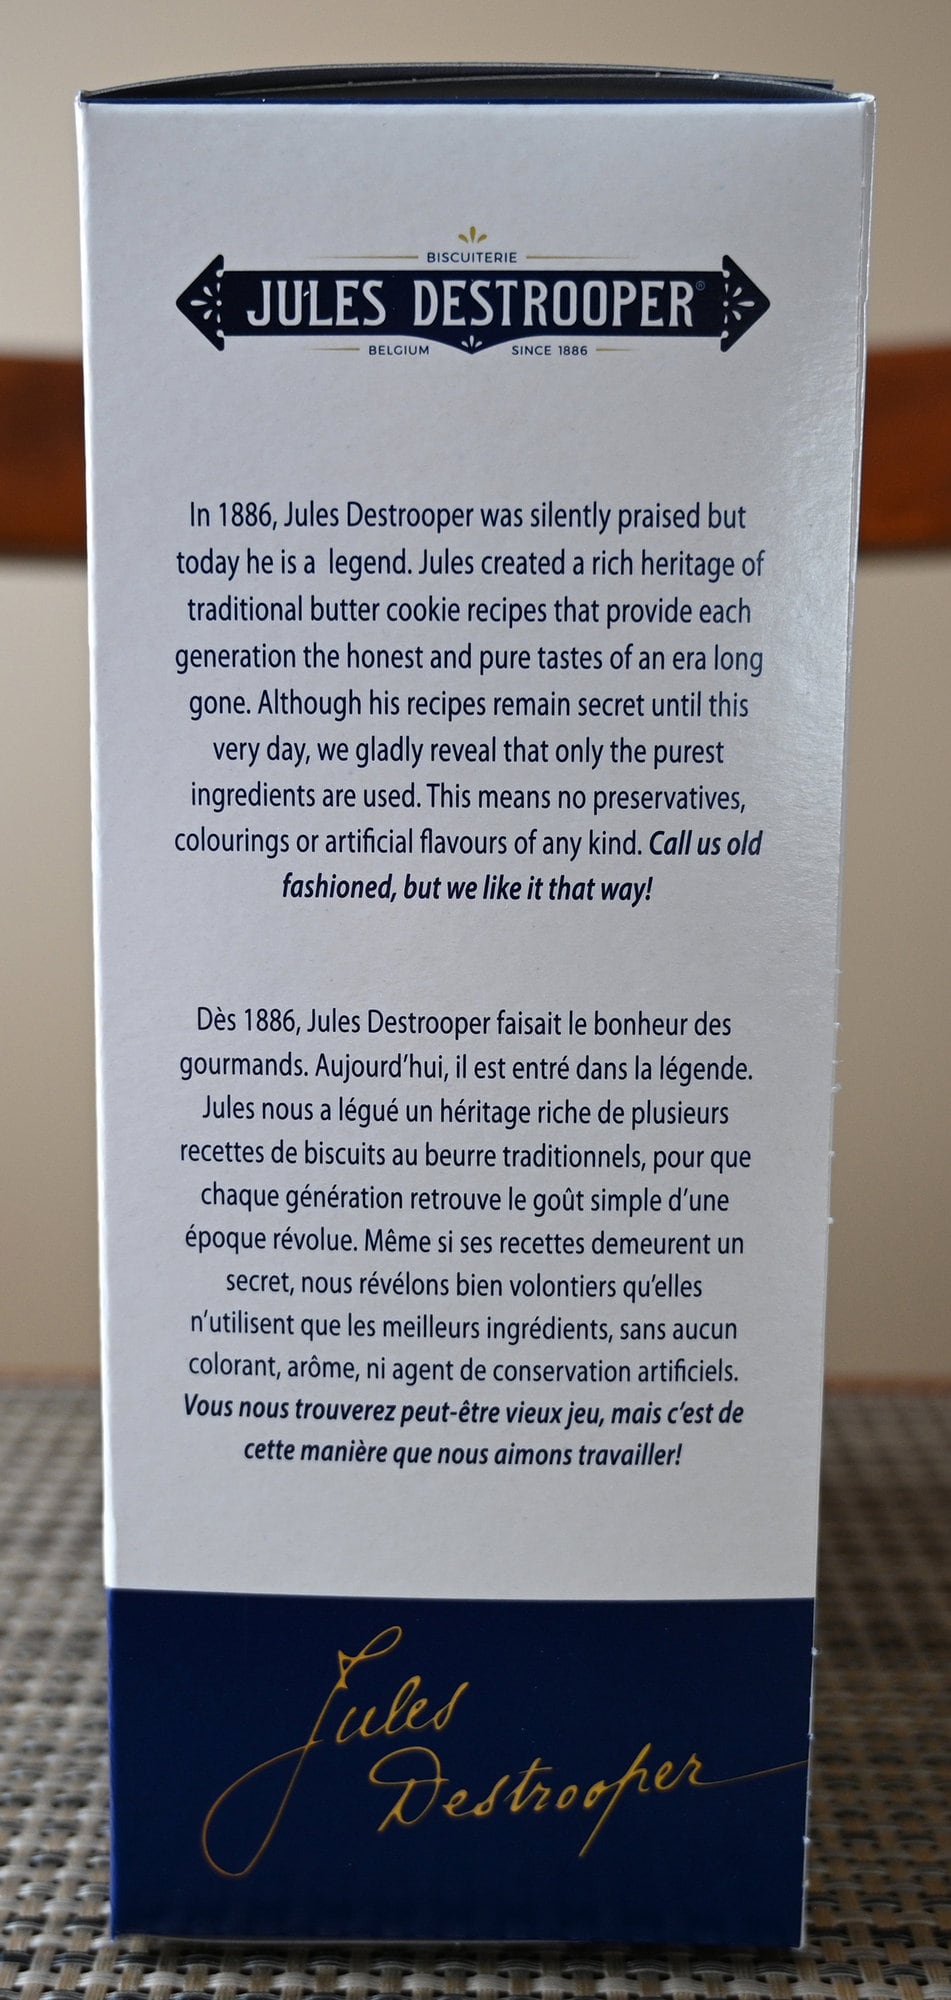 Image of the company and product description from the back of the box.